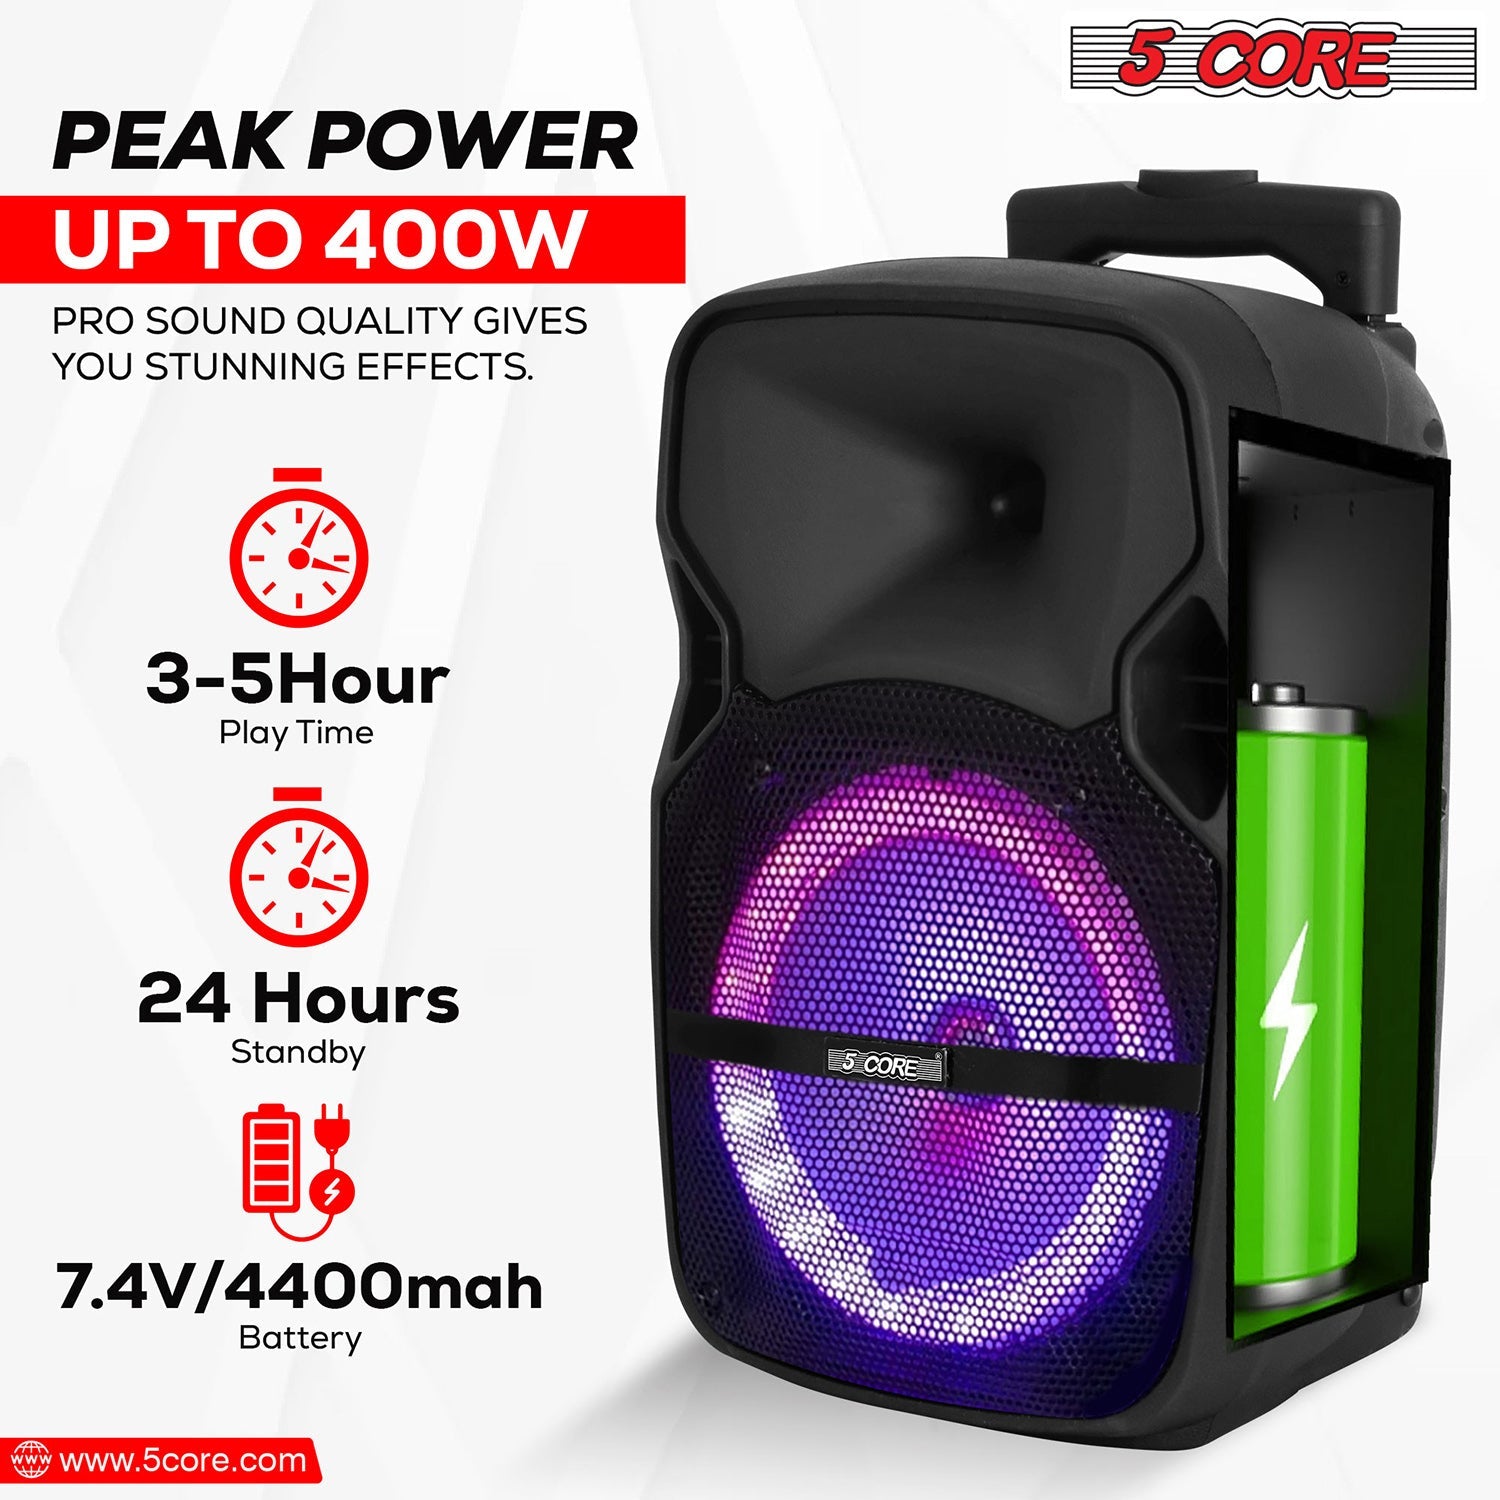 Bluetooth DJ Speaker by 5Core: Portable, loud, with wireless microphones, perfect for parties and karaoke.